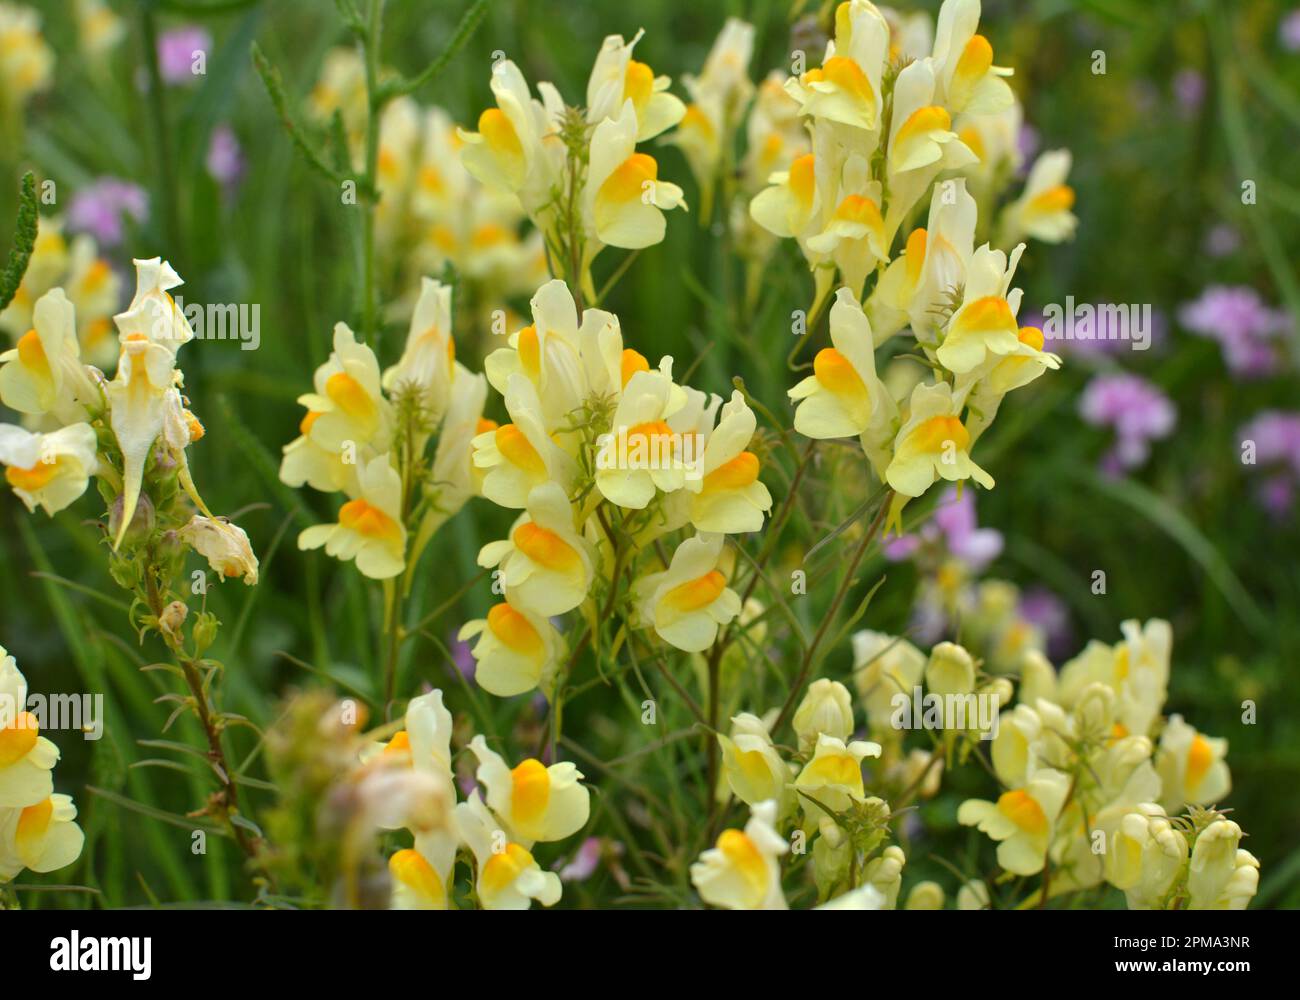 Linaria vulgaris blooms in the wild among grasses Stock Photo